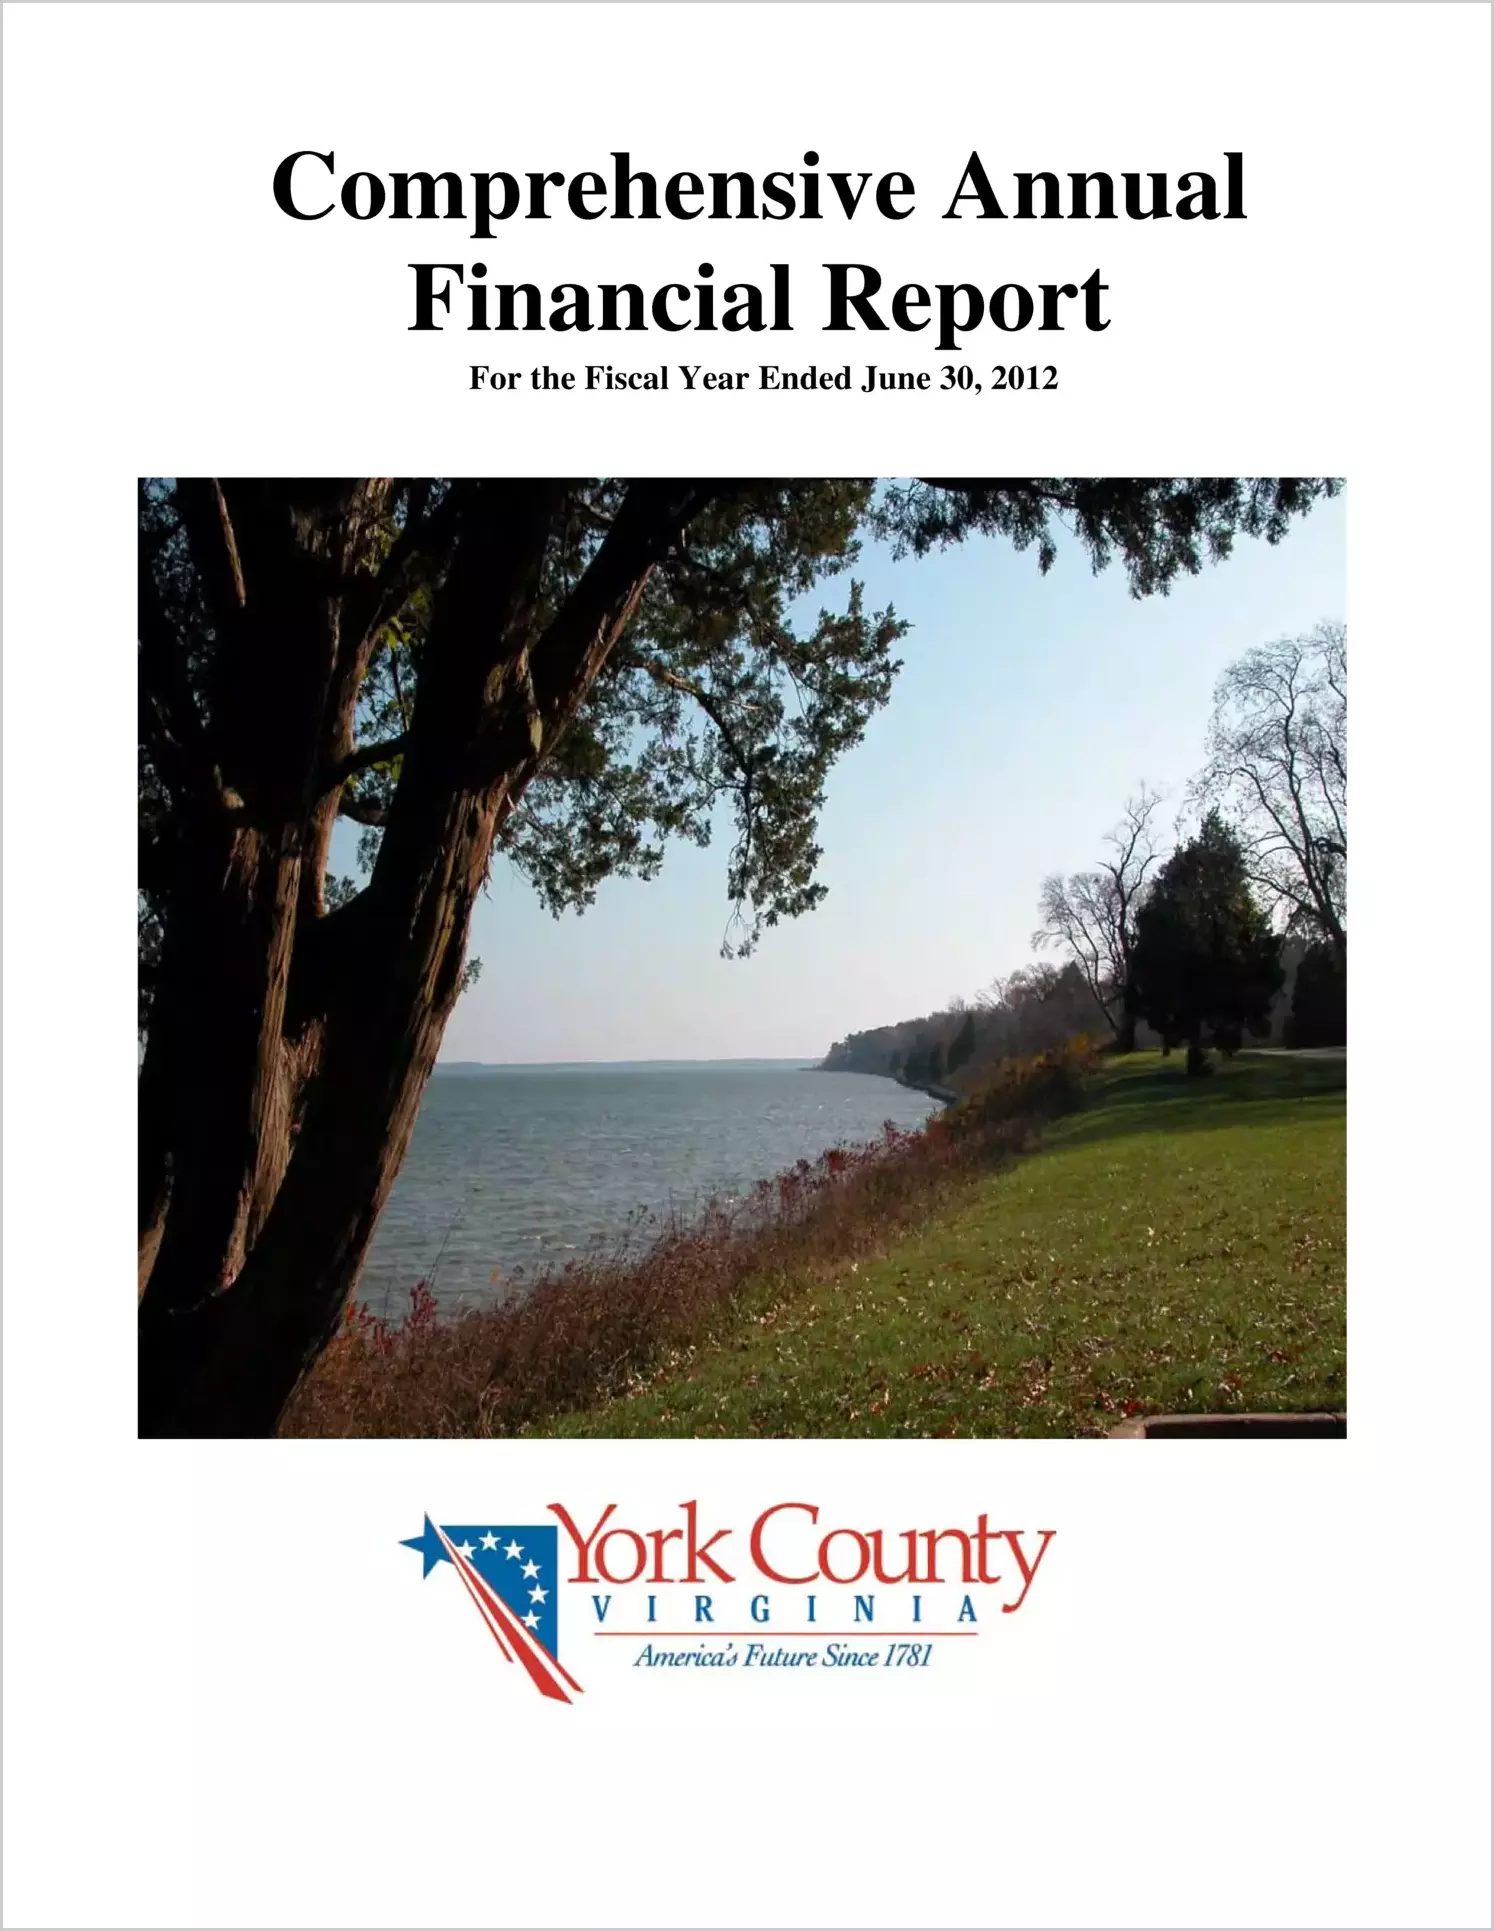 2012 Annual Financial Report for County of York